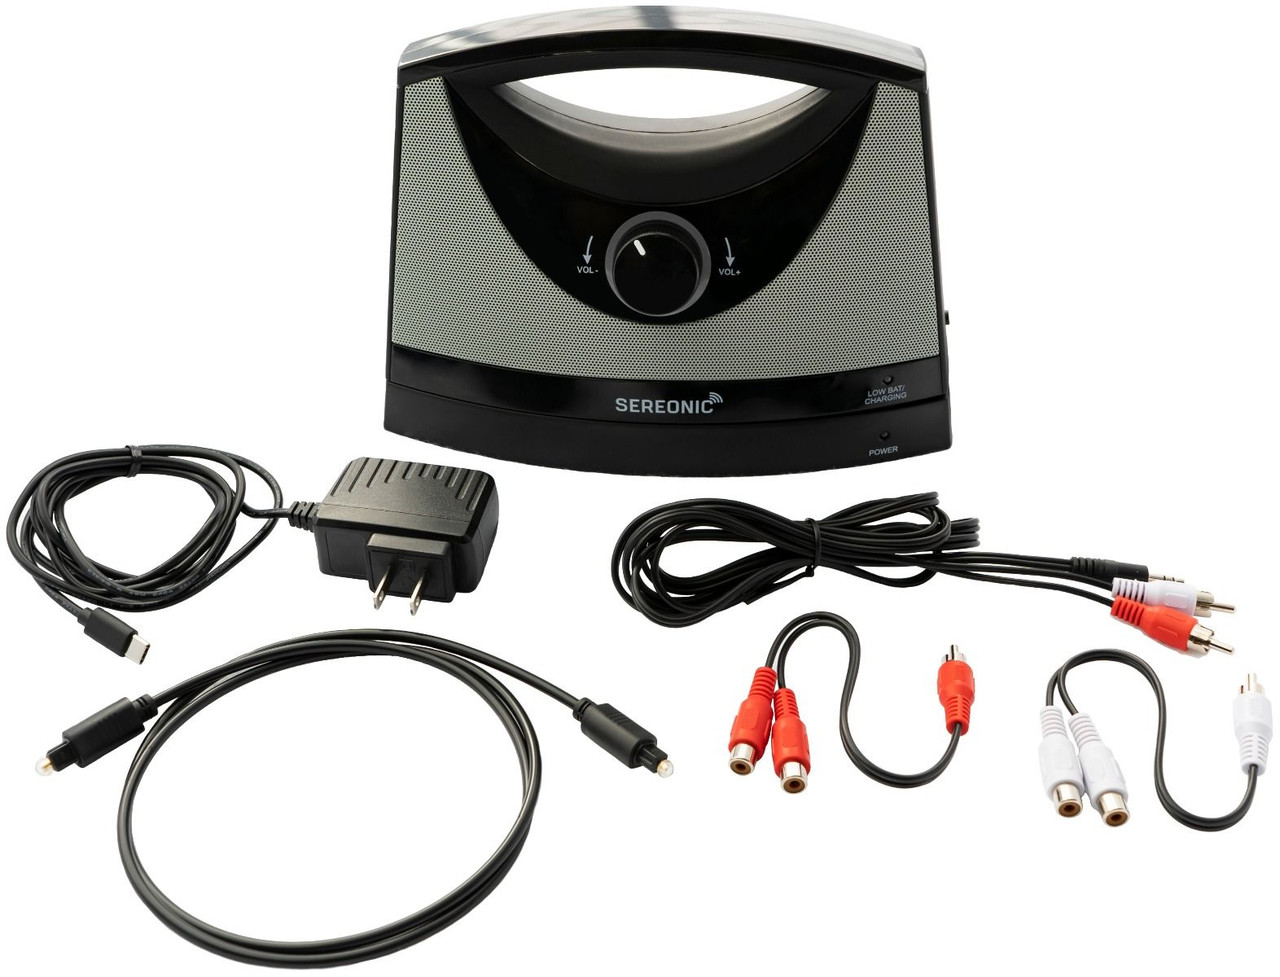 Sereonic TV SoundBox® by Serene - BT100 (Full Kit with analog audio cables, digital/optical audio cable, and power adapter)